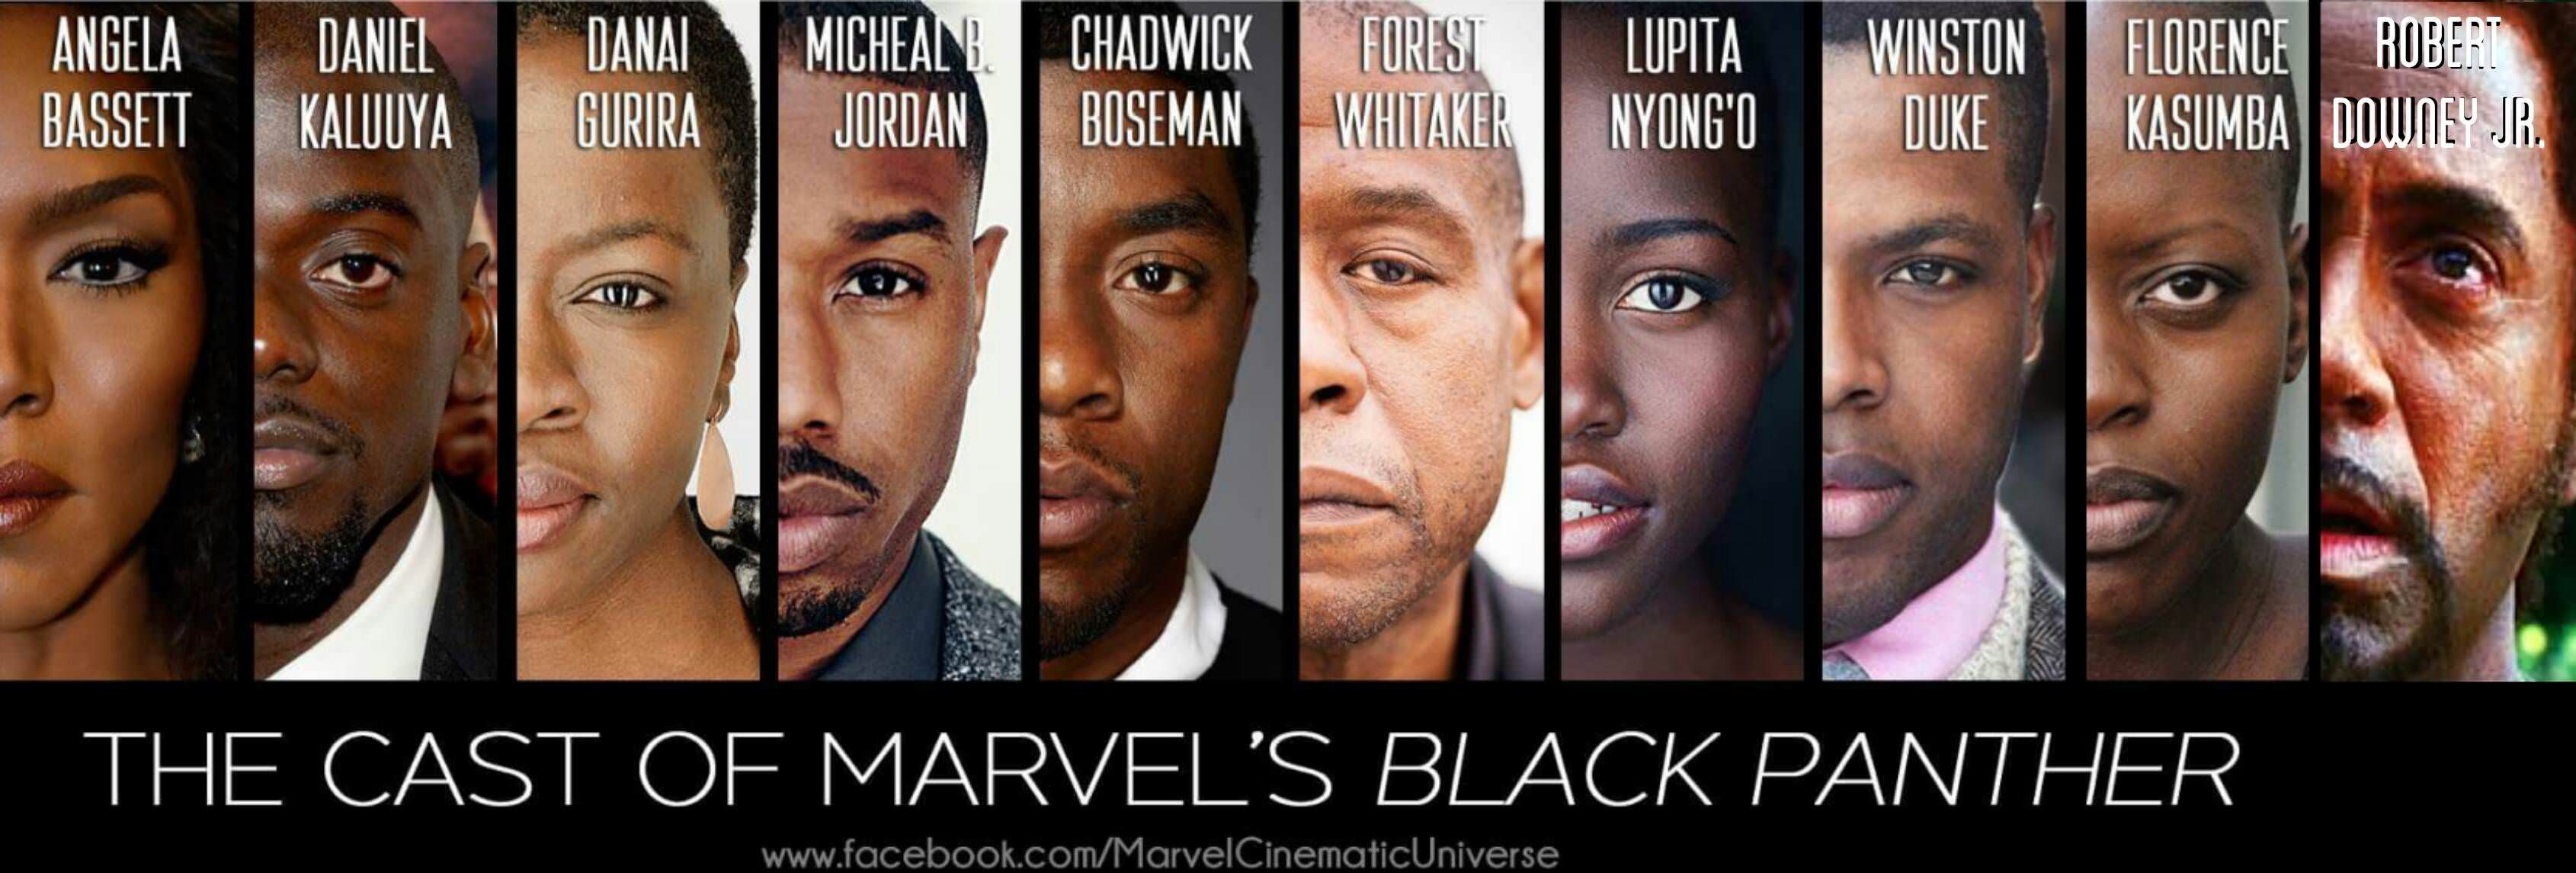 The cast of Marvel's "Black Panther"